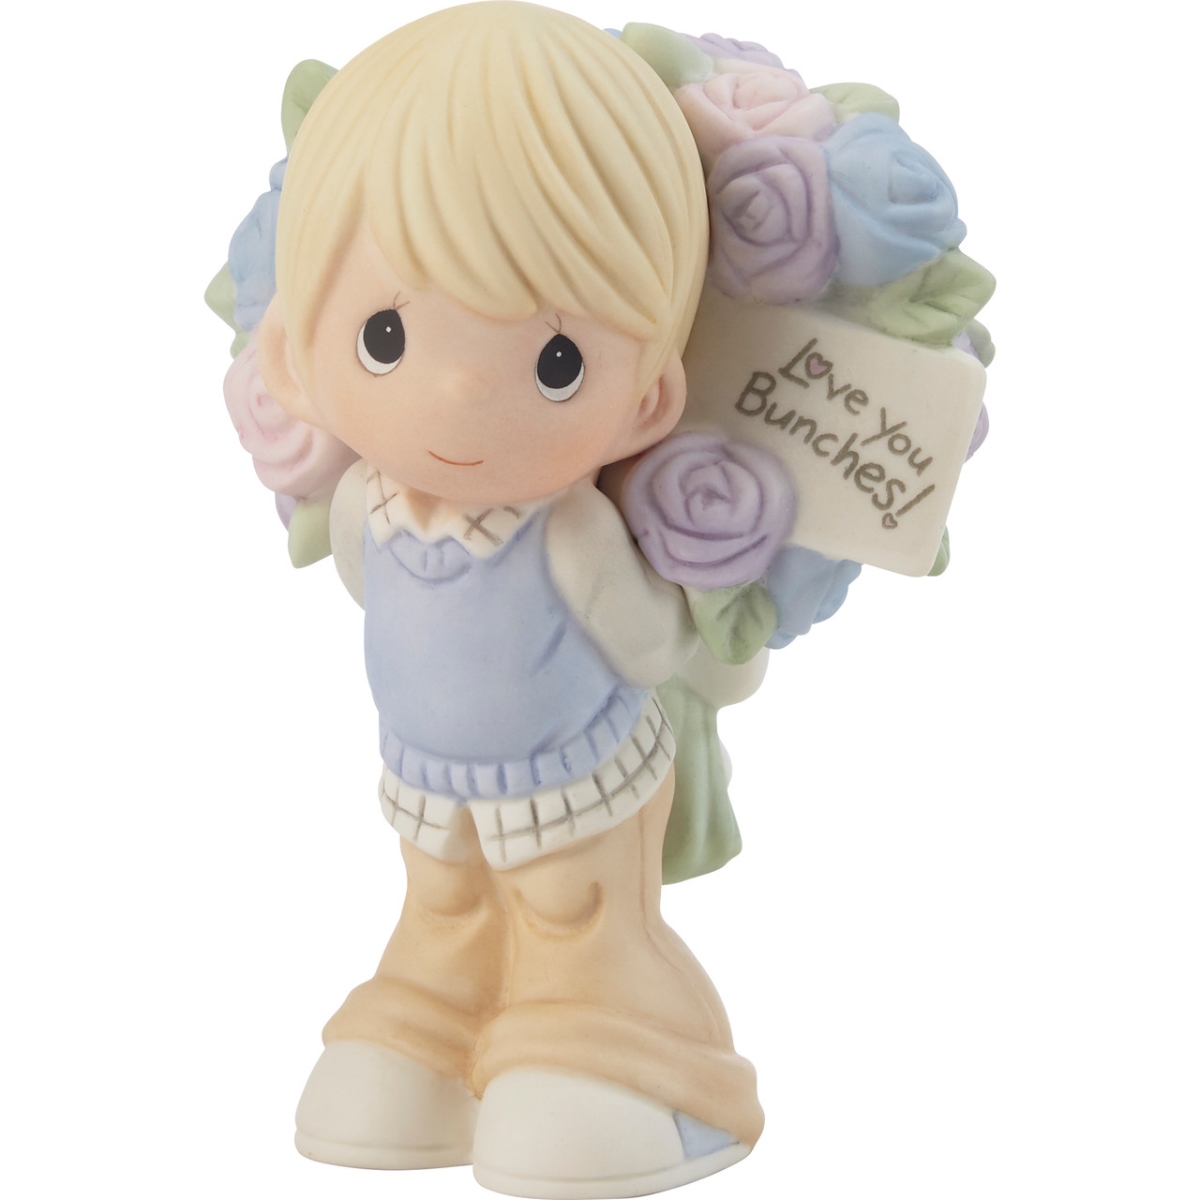 Picture of Be the Light Christian Bookstore 222001 4.75 in. Porcelain Holding Red Velvet Cupcake Girl Blonde Figurine, Multi Color